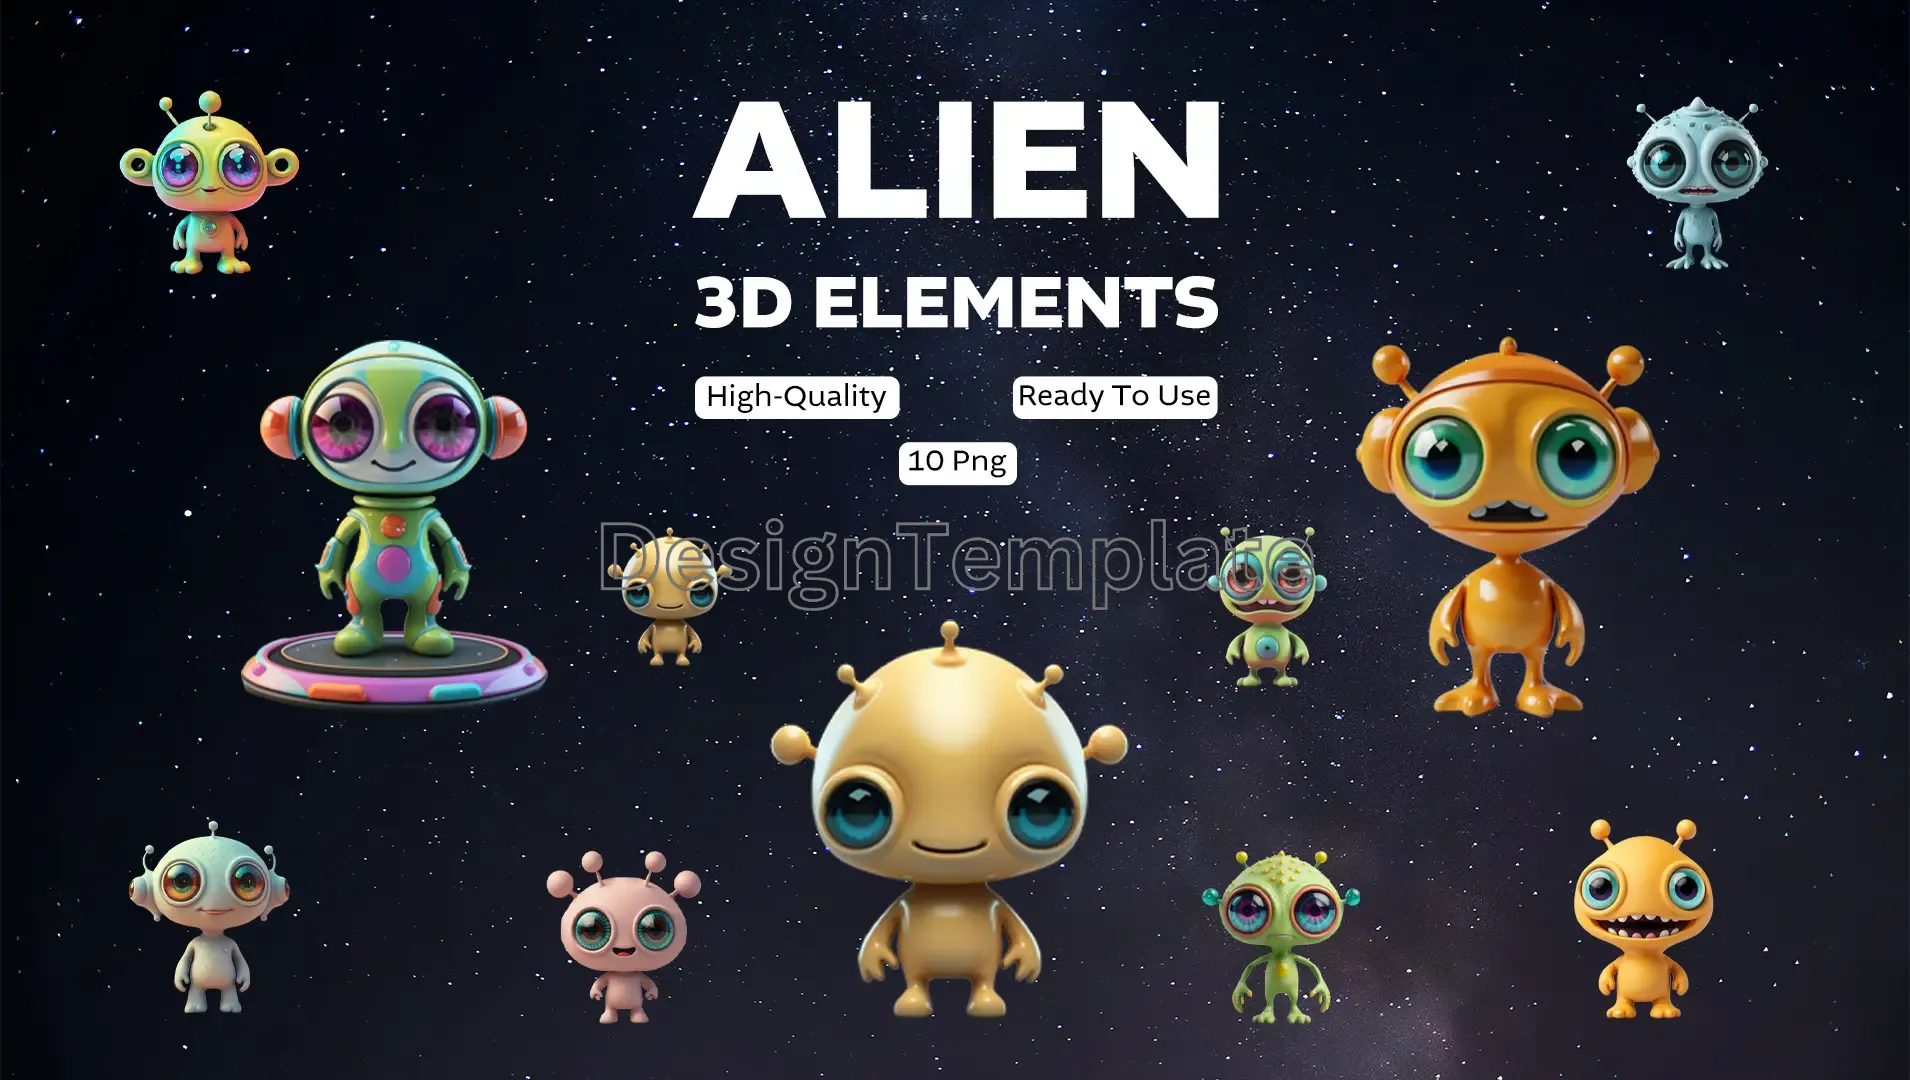 Galactic Gatherings Alien 3D Elements Collection image